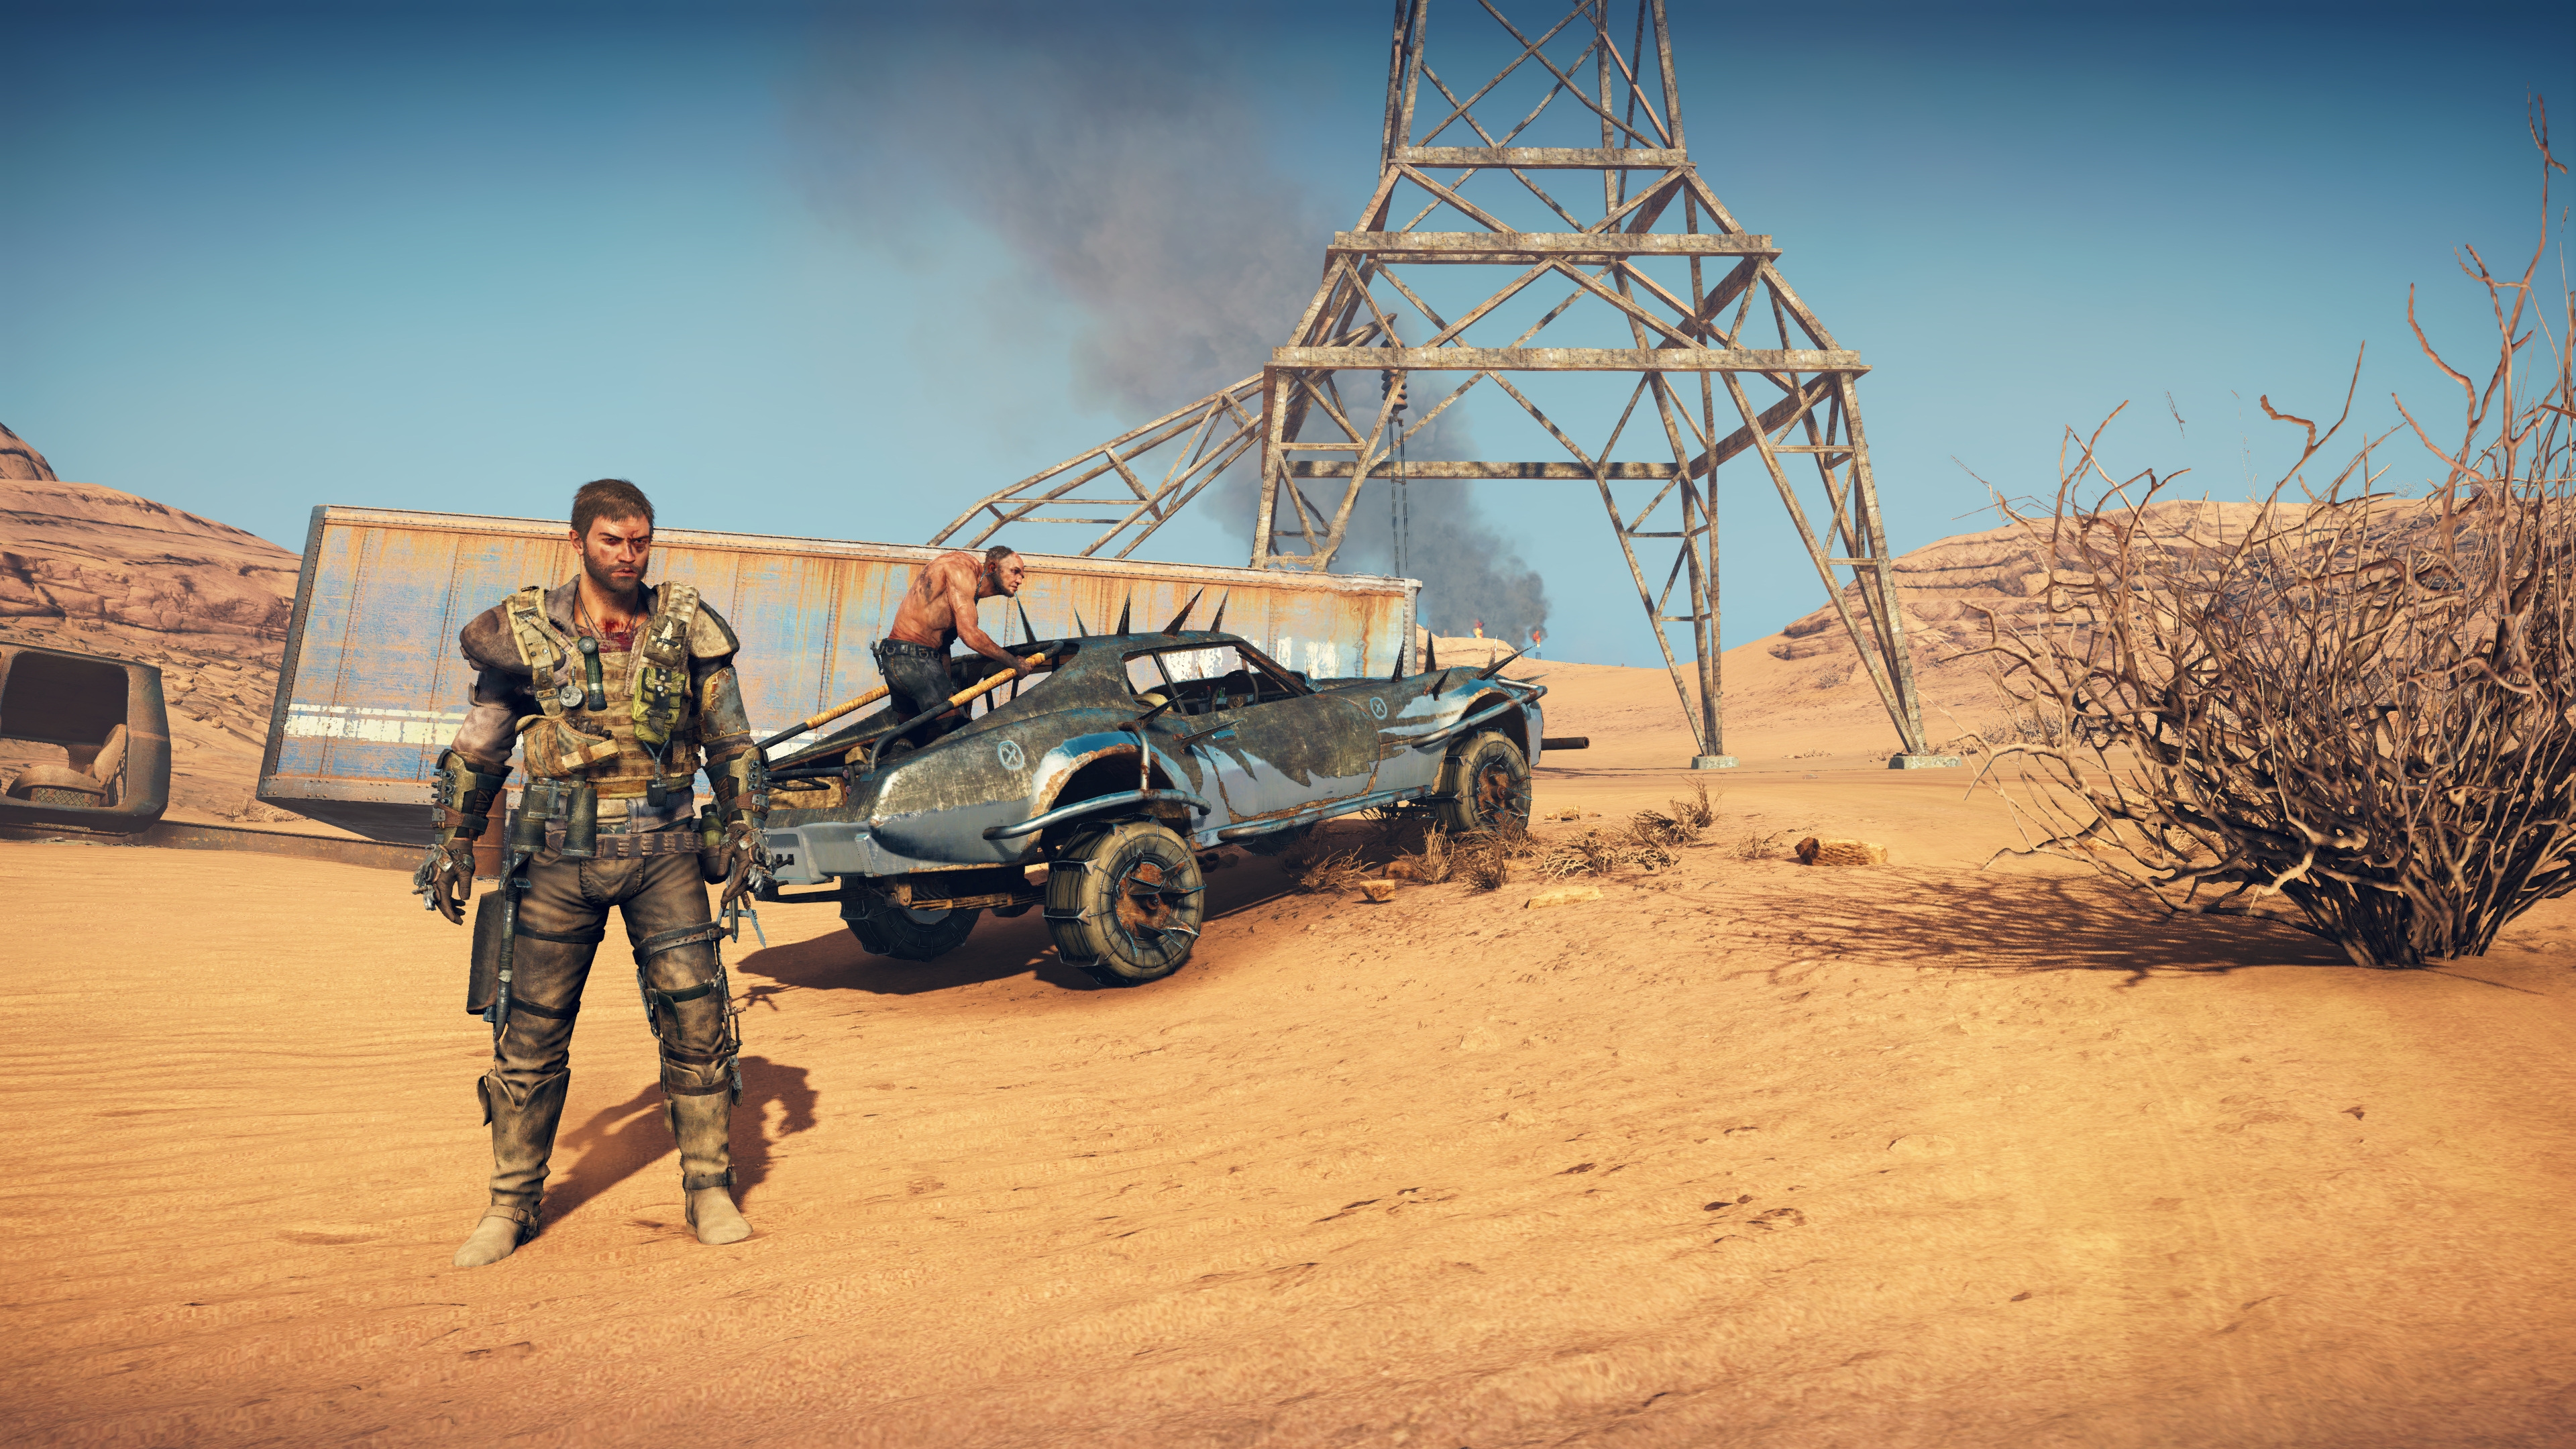 Free download wallpaper Video Game, Mad Max on your PC desktop